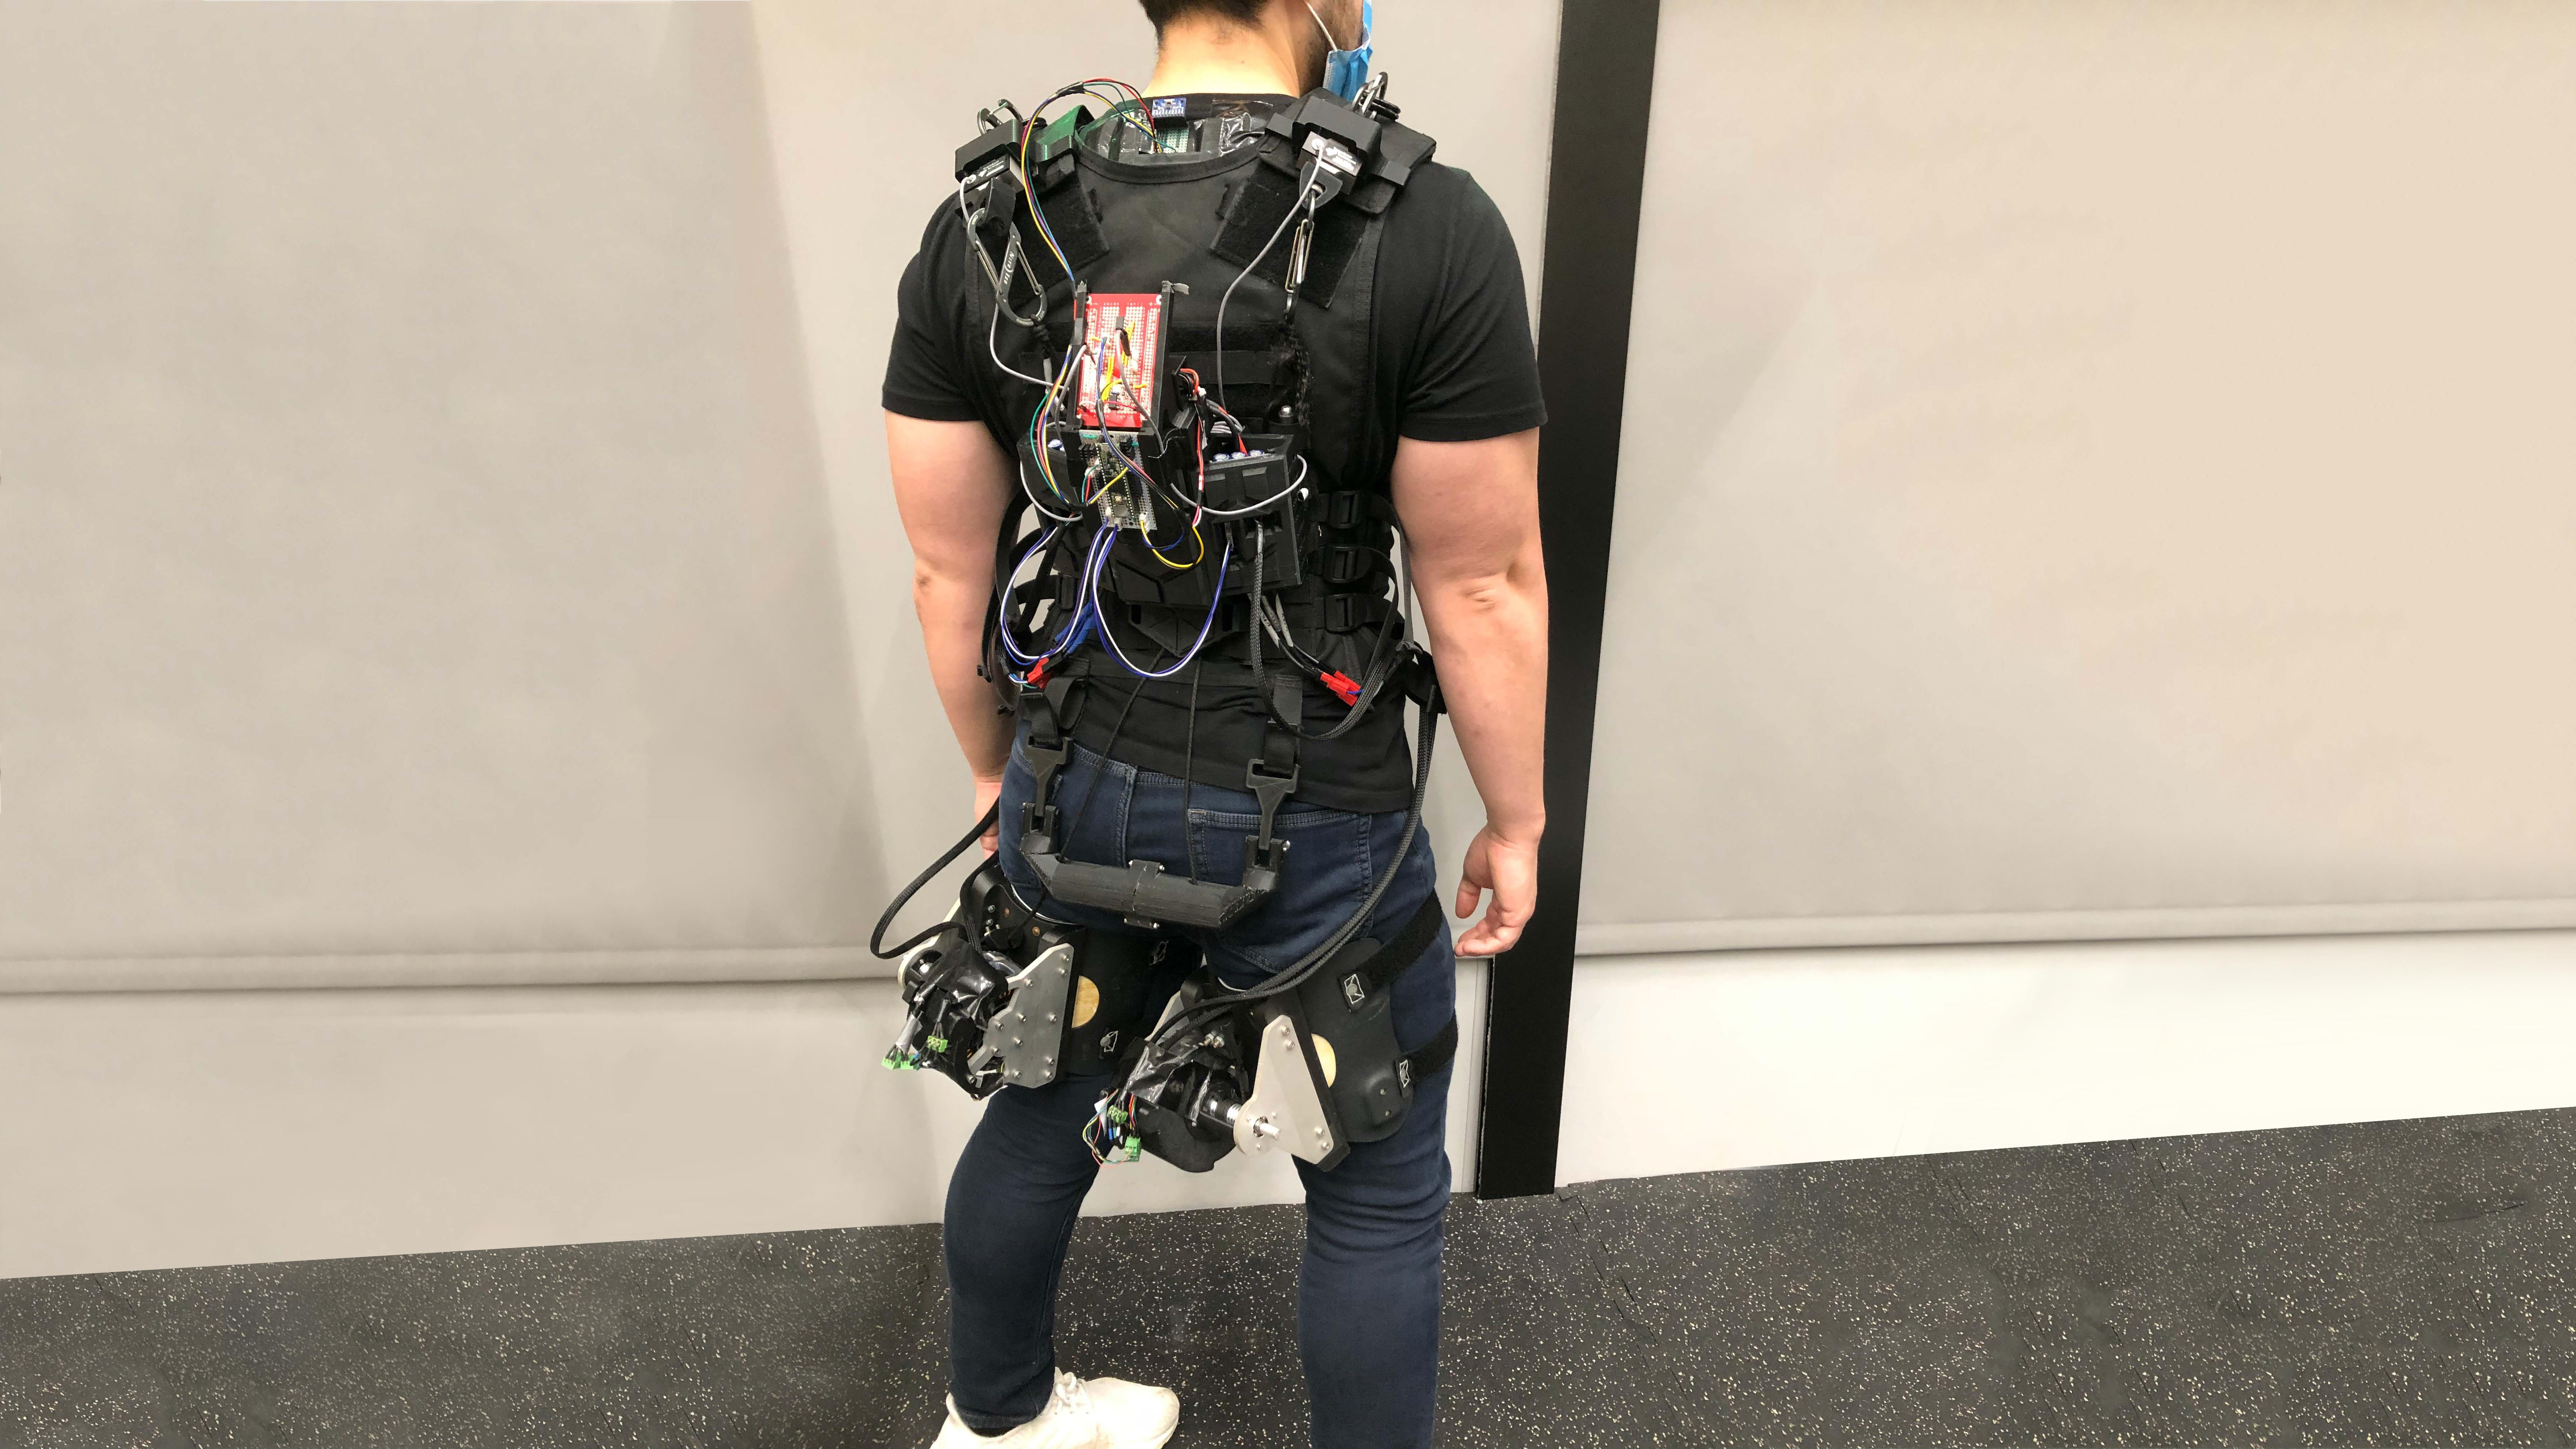 A student wearing the Asymmetric Back eXosuit (ABX) developed at Georgia Tech.